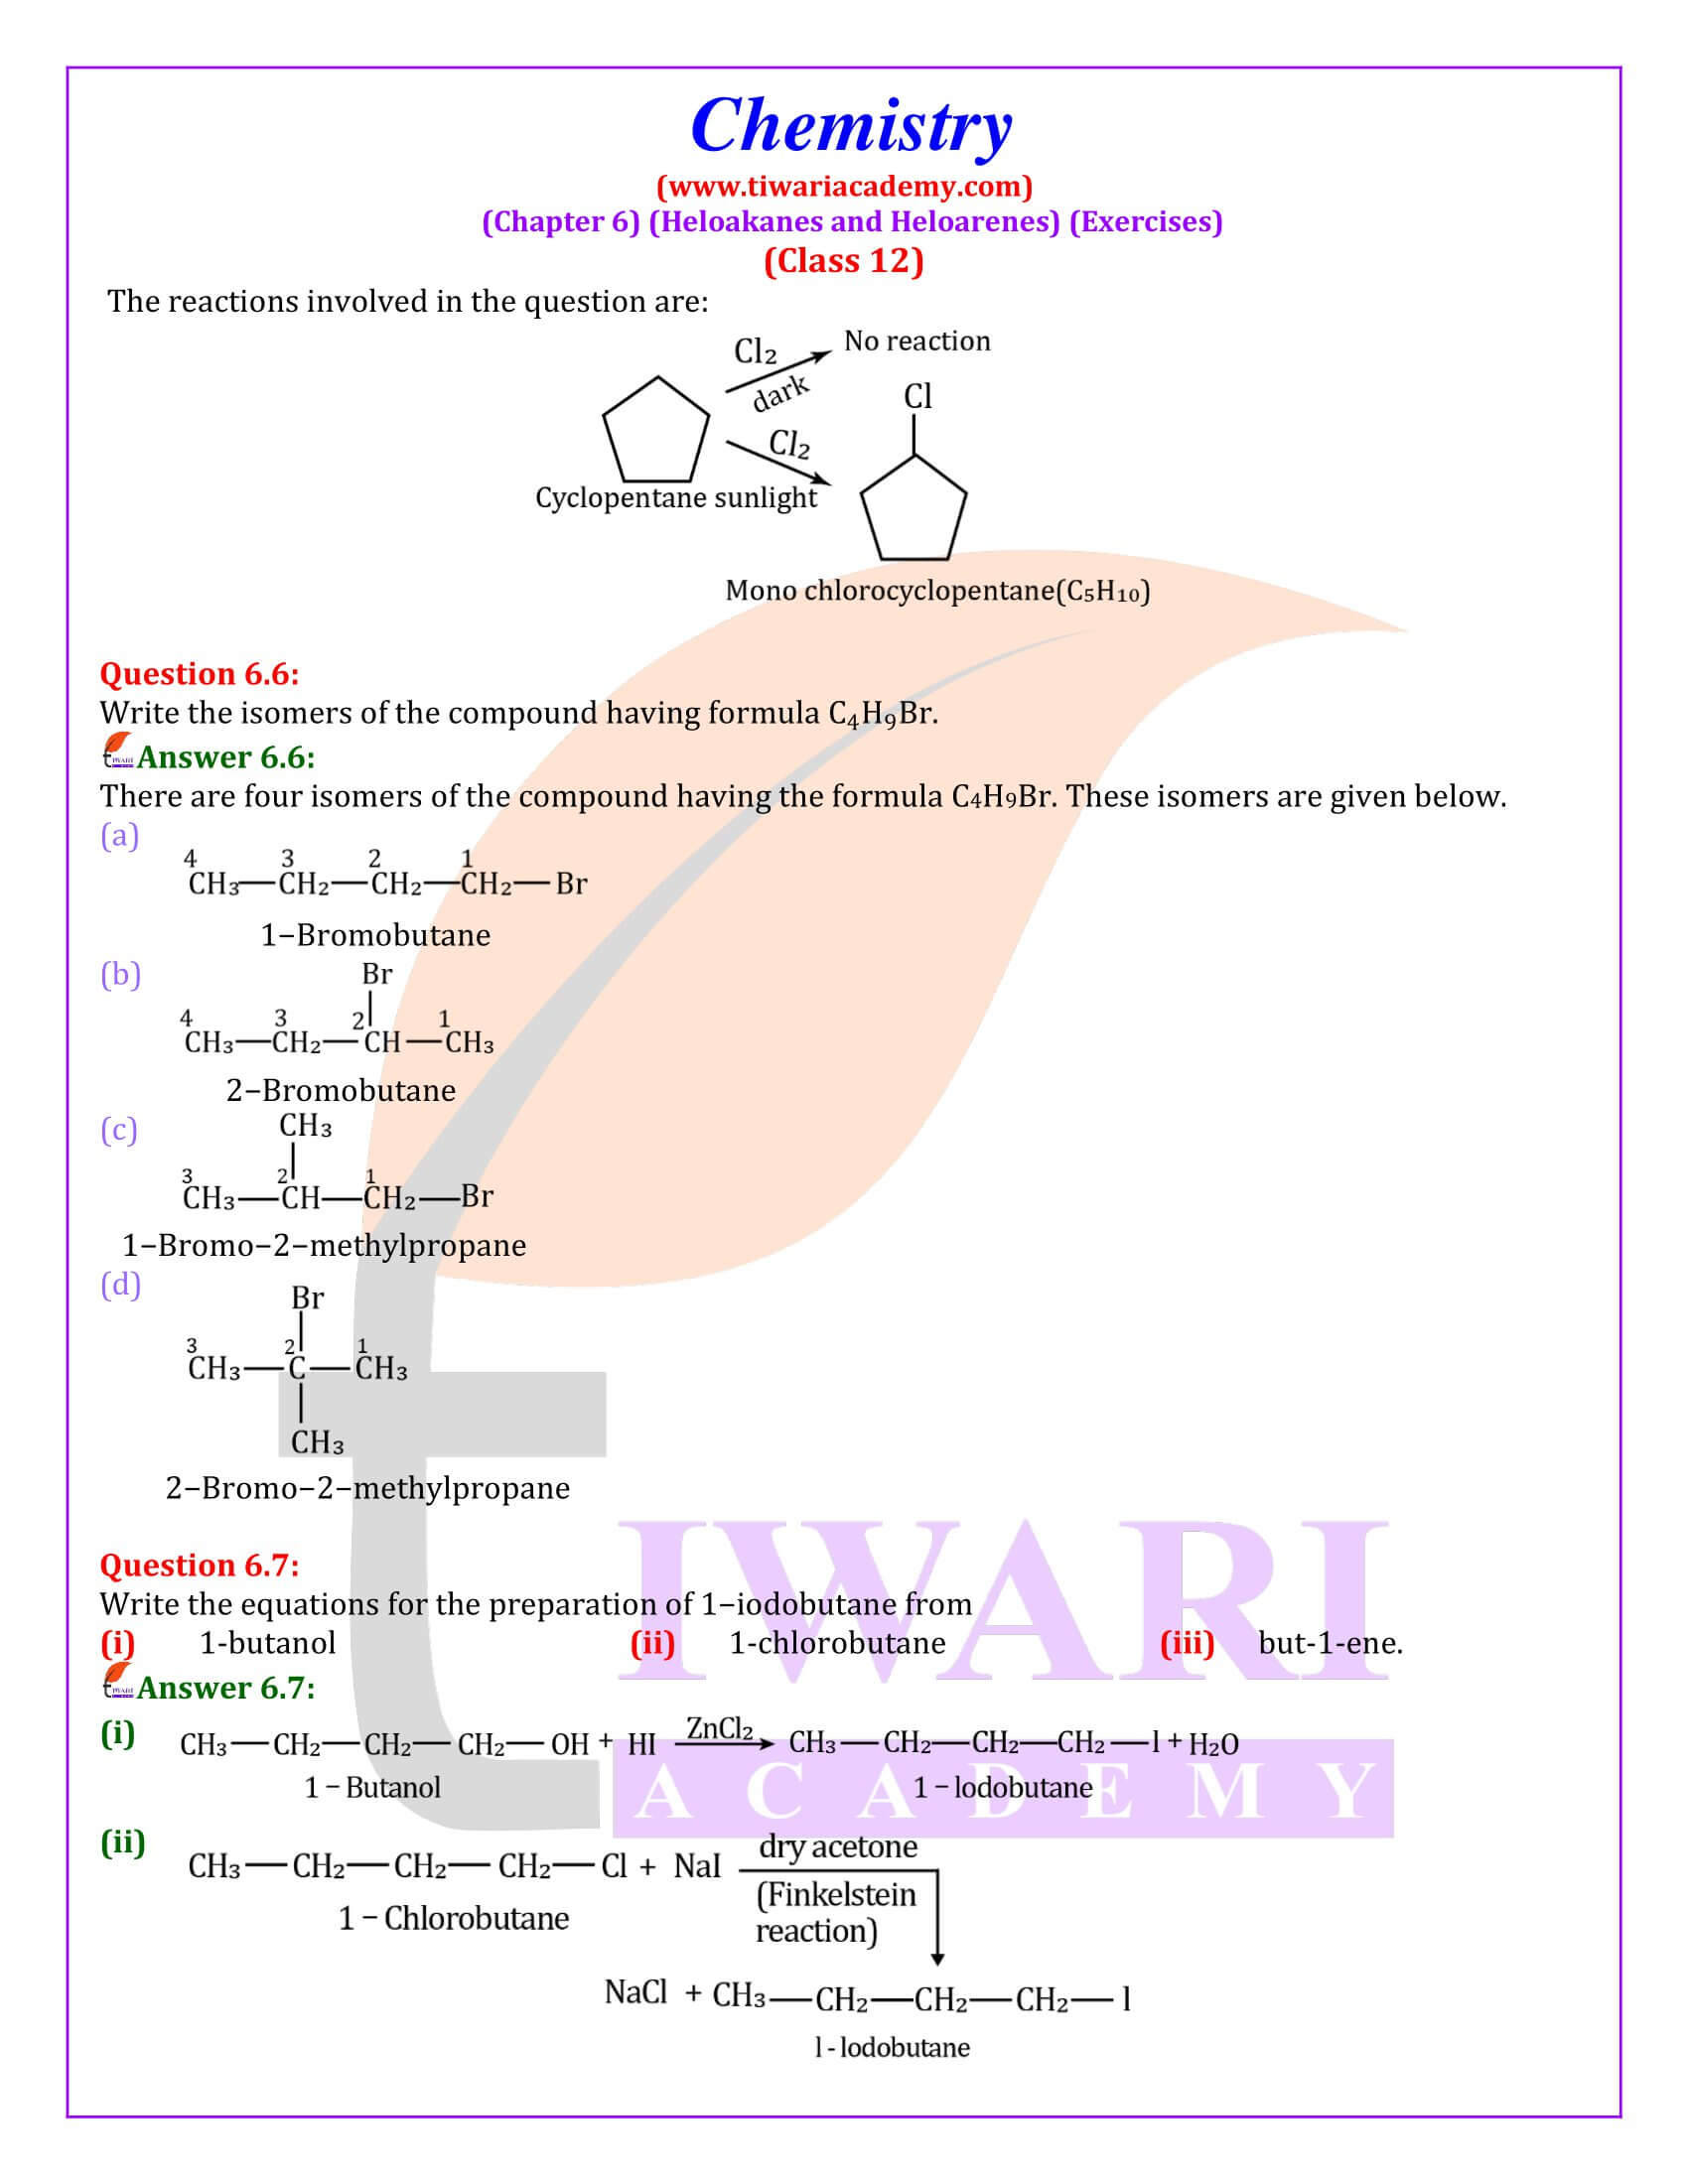 NCERT Solutions for Class 12 Chemistry Chapter 6 all questions